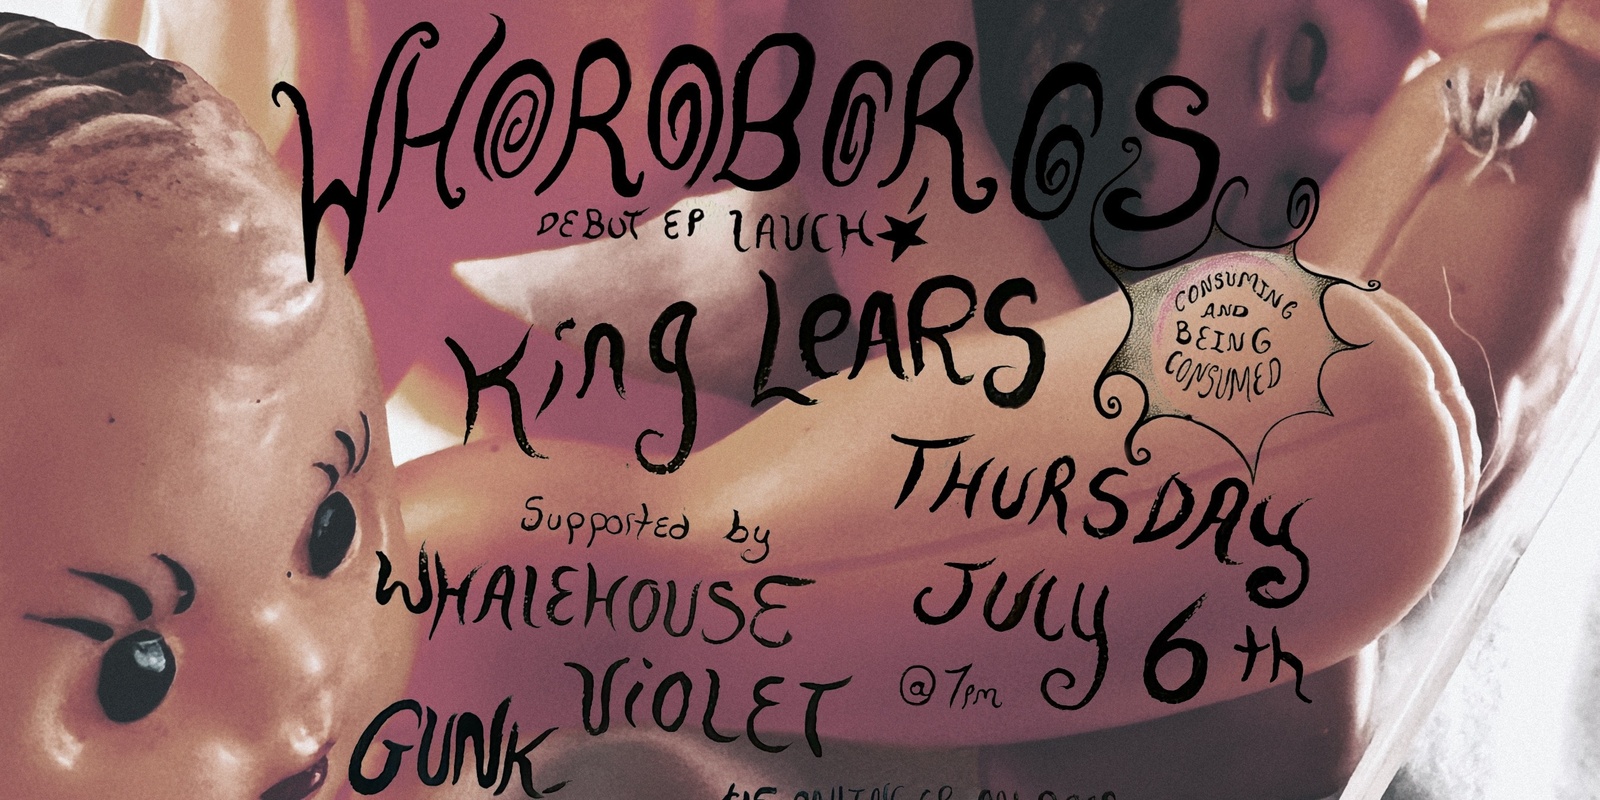 Banner image for Whoroboros "Consuming & Being Consumed" EP Launch